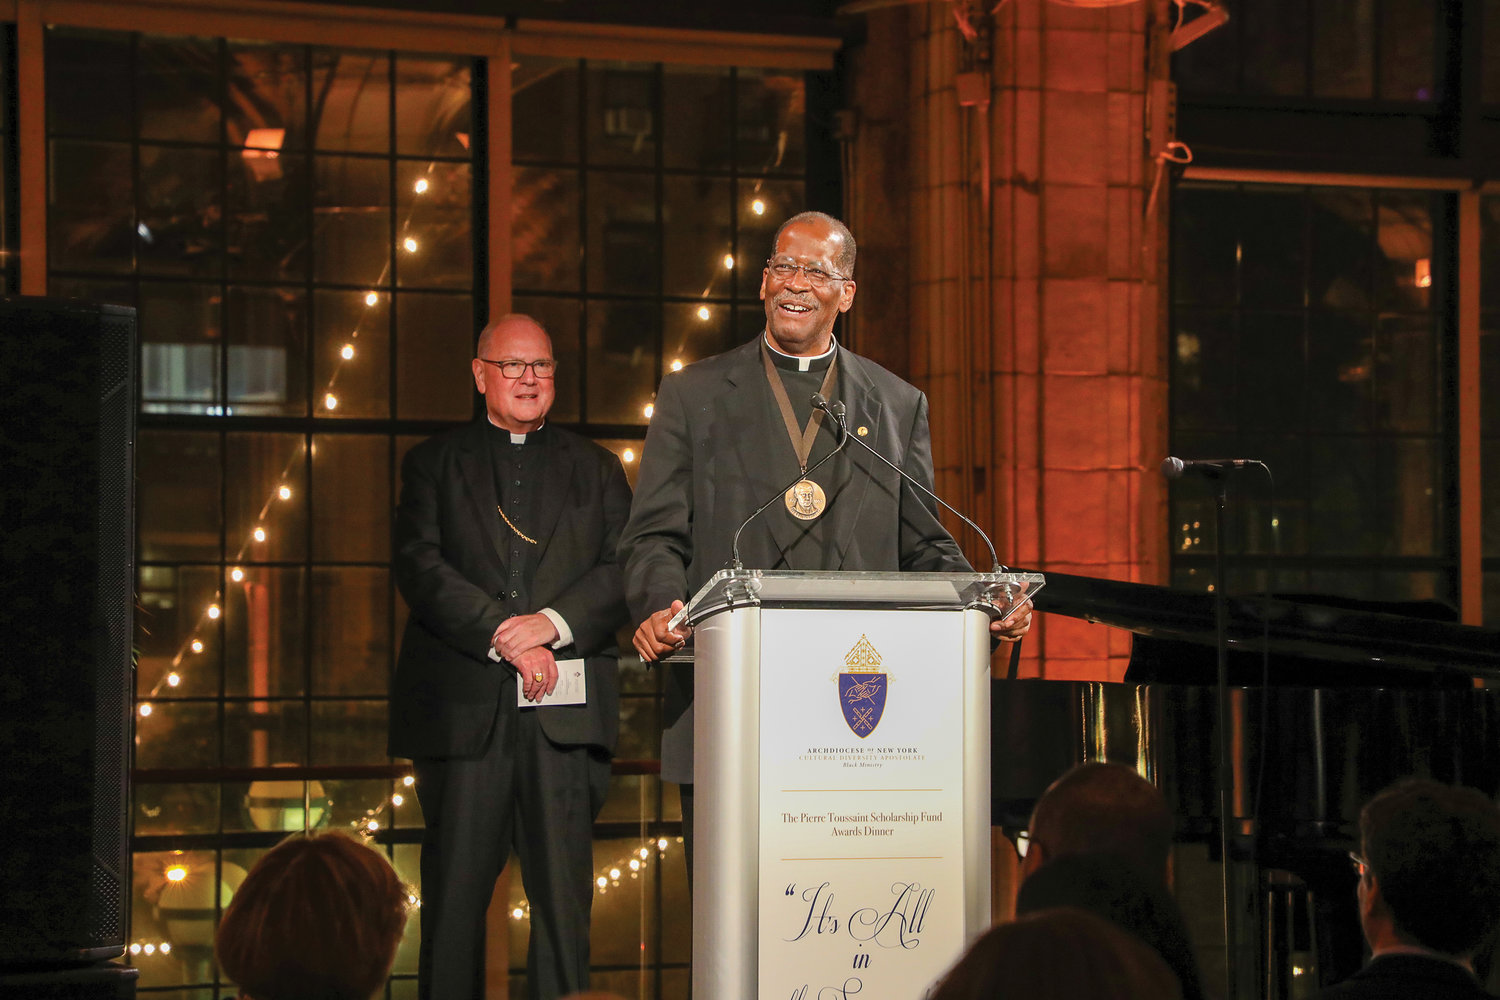 Honoree, Father Gregory Chisholm, S.J., former pastor of St. Charles Borromeo-Resurrection parish in Harlem, delivers his remarks.